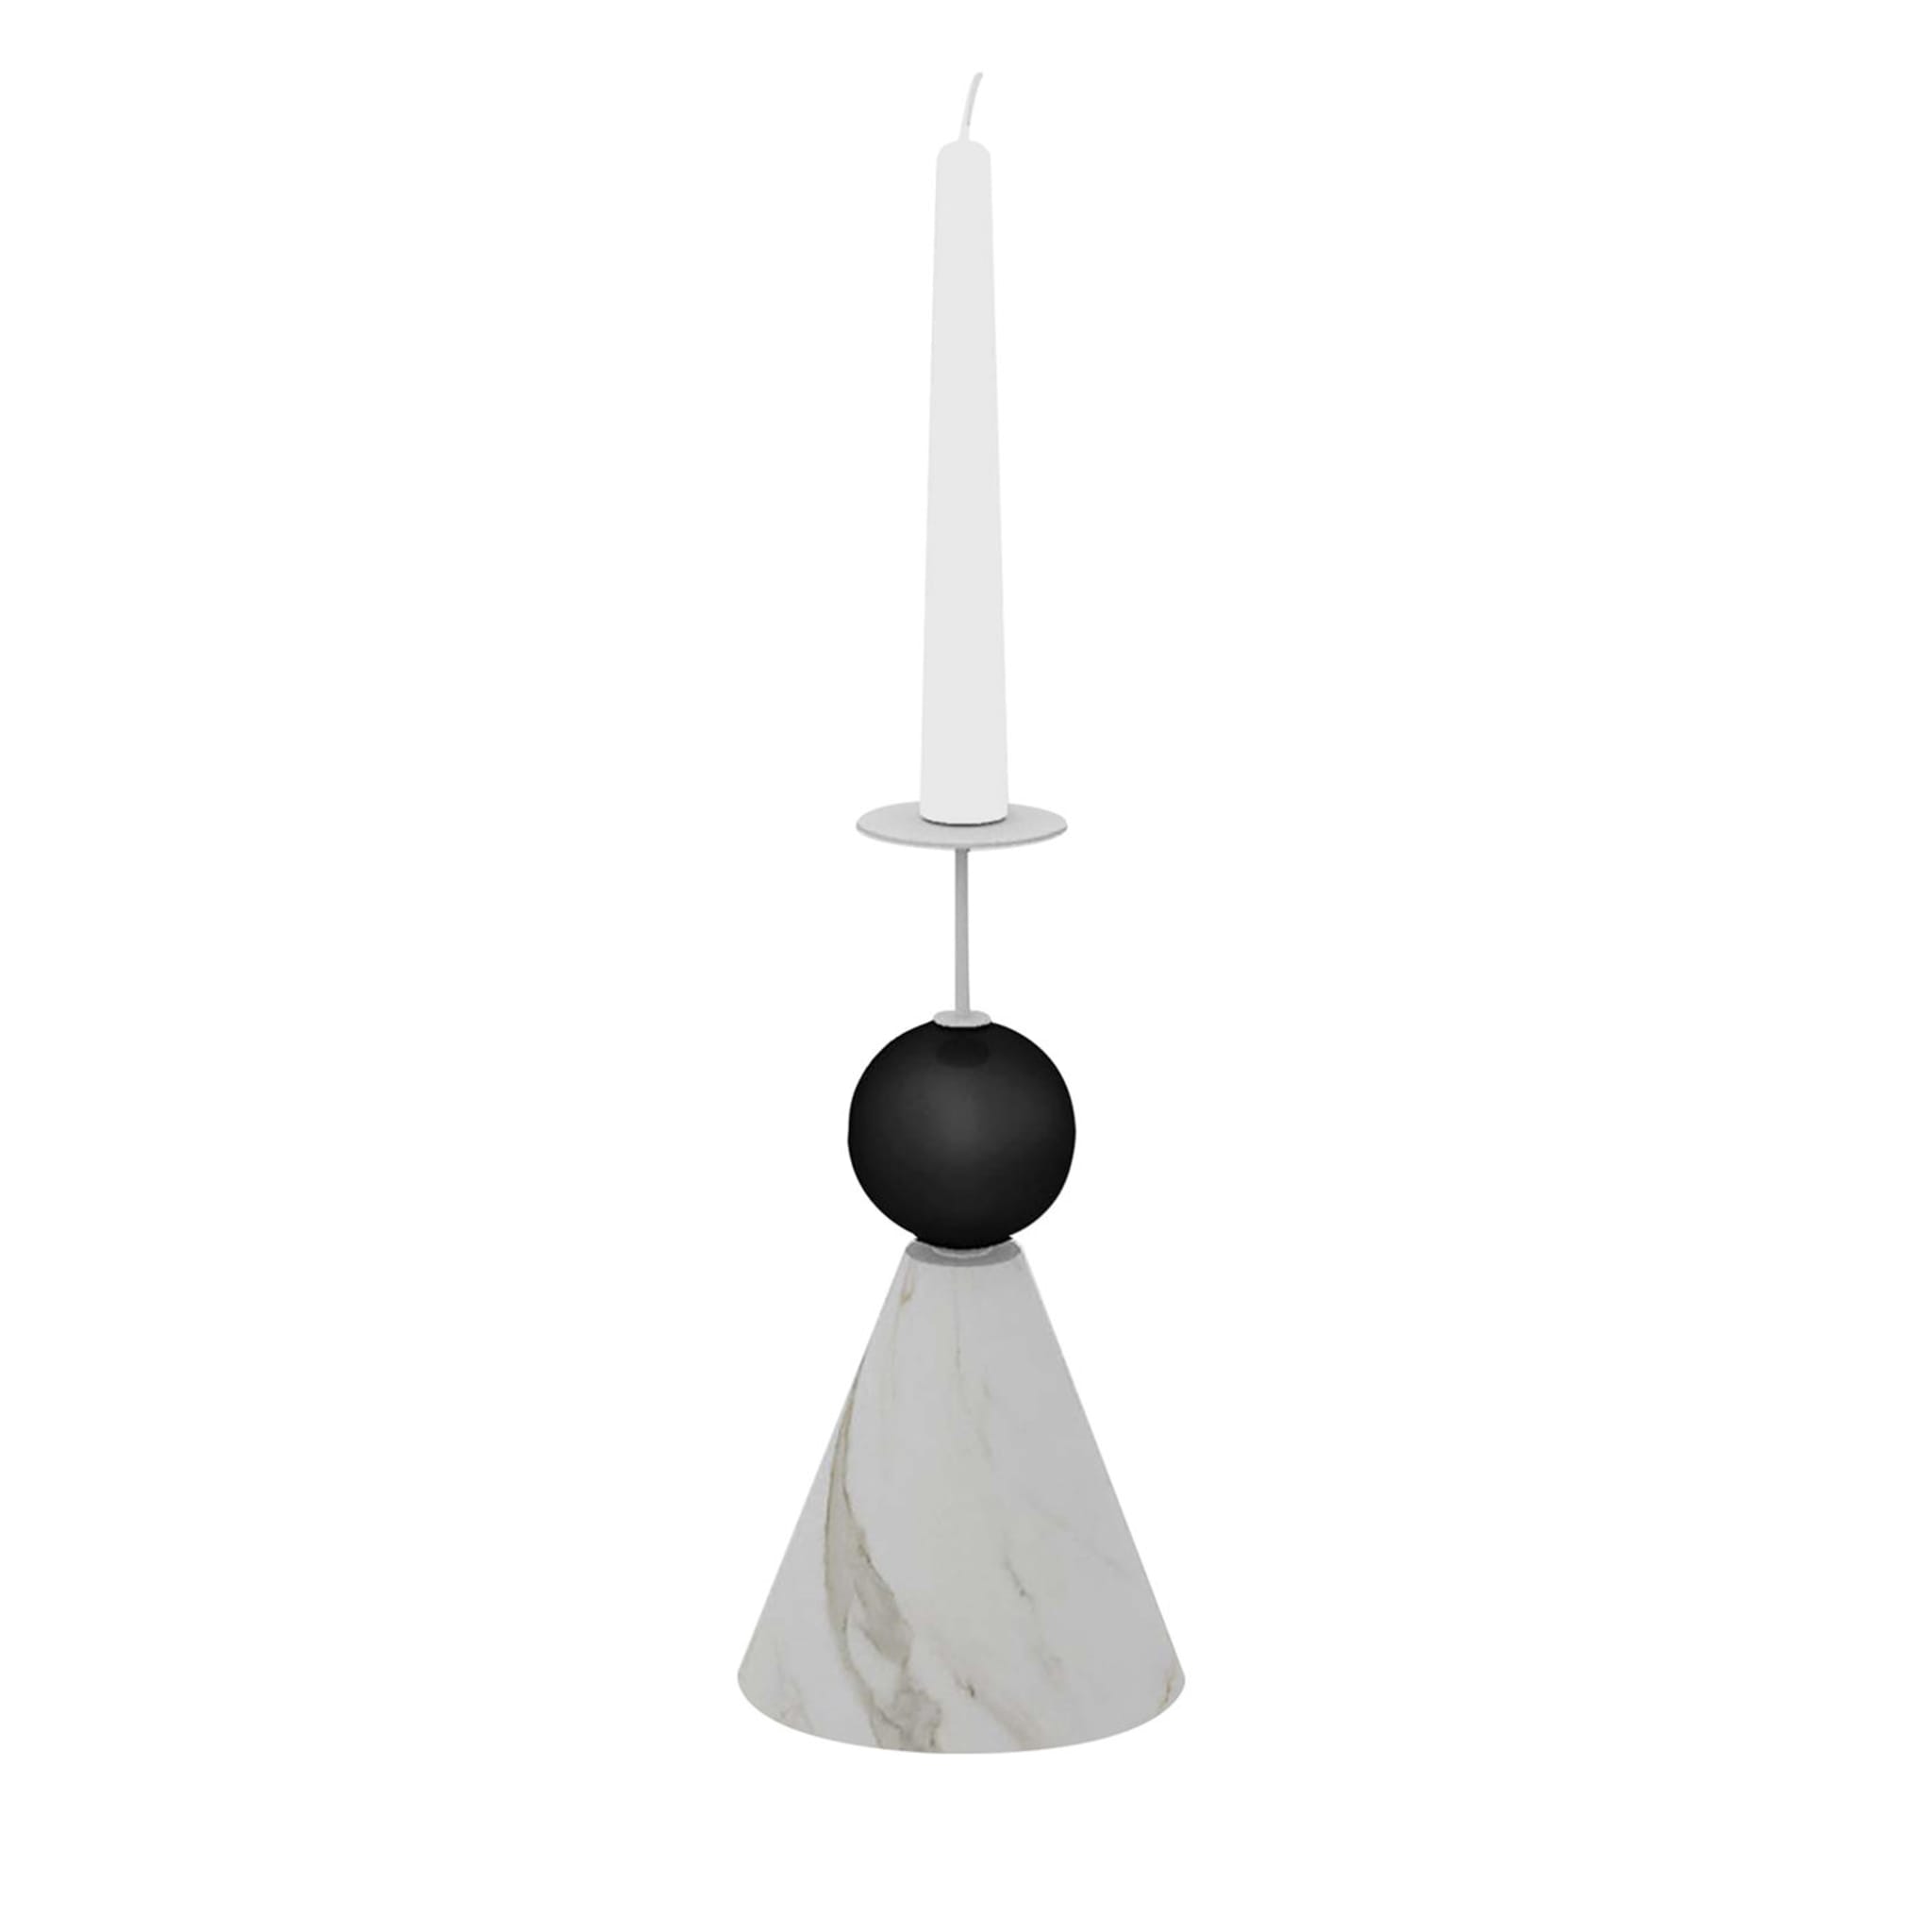 Raccontami Black and White Candle Holder - Main view